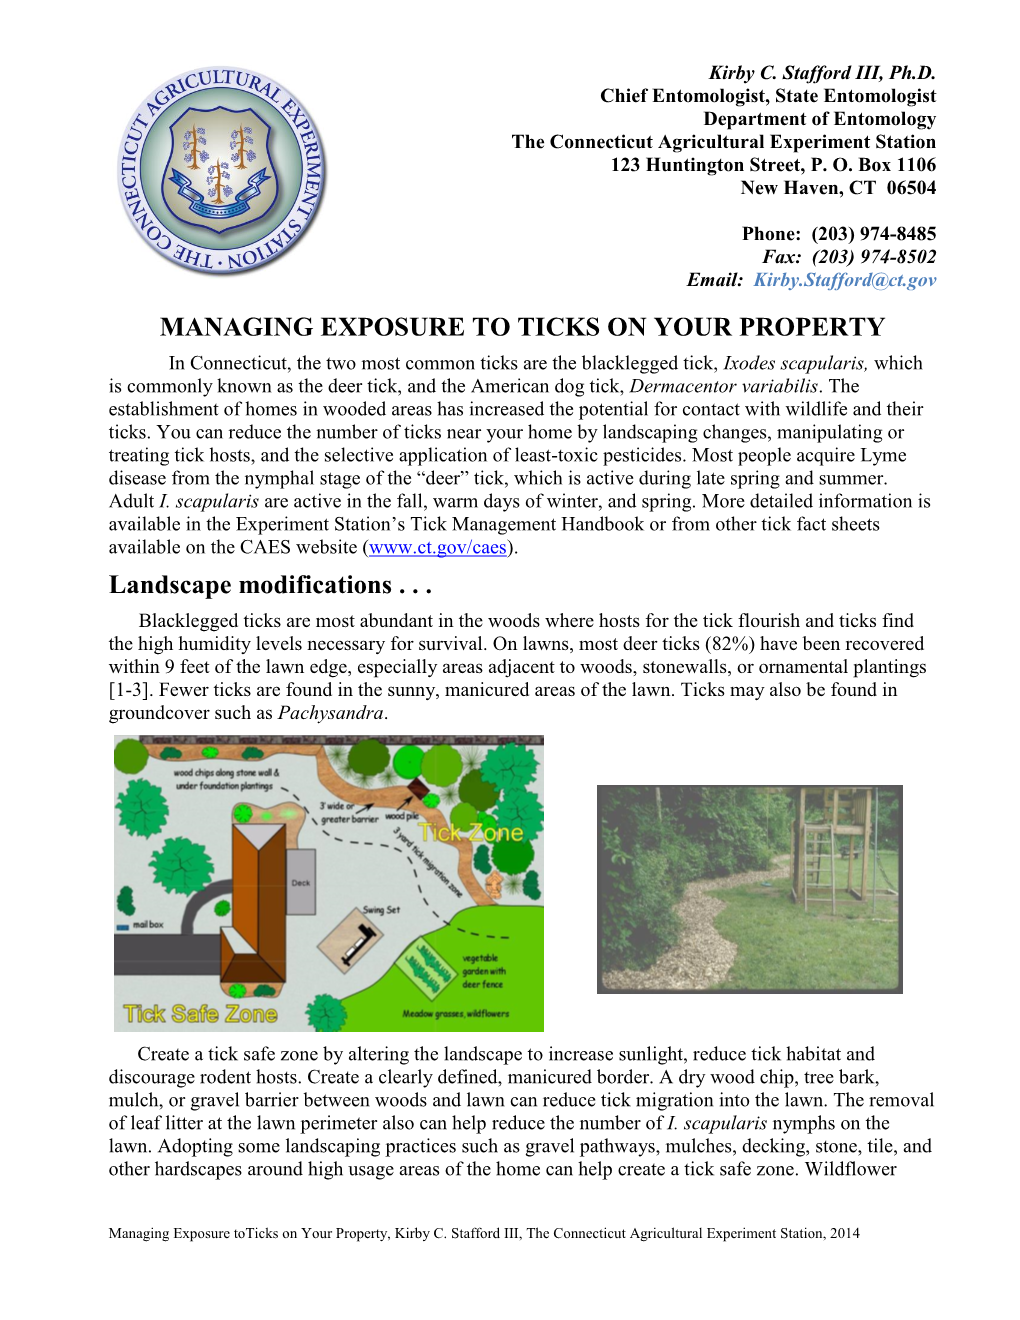 Managing Exposure to Ticks on Your Property